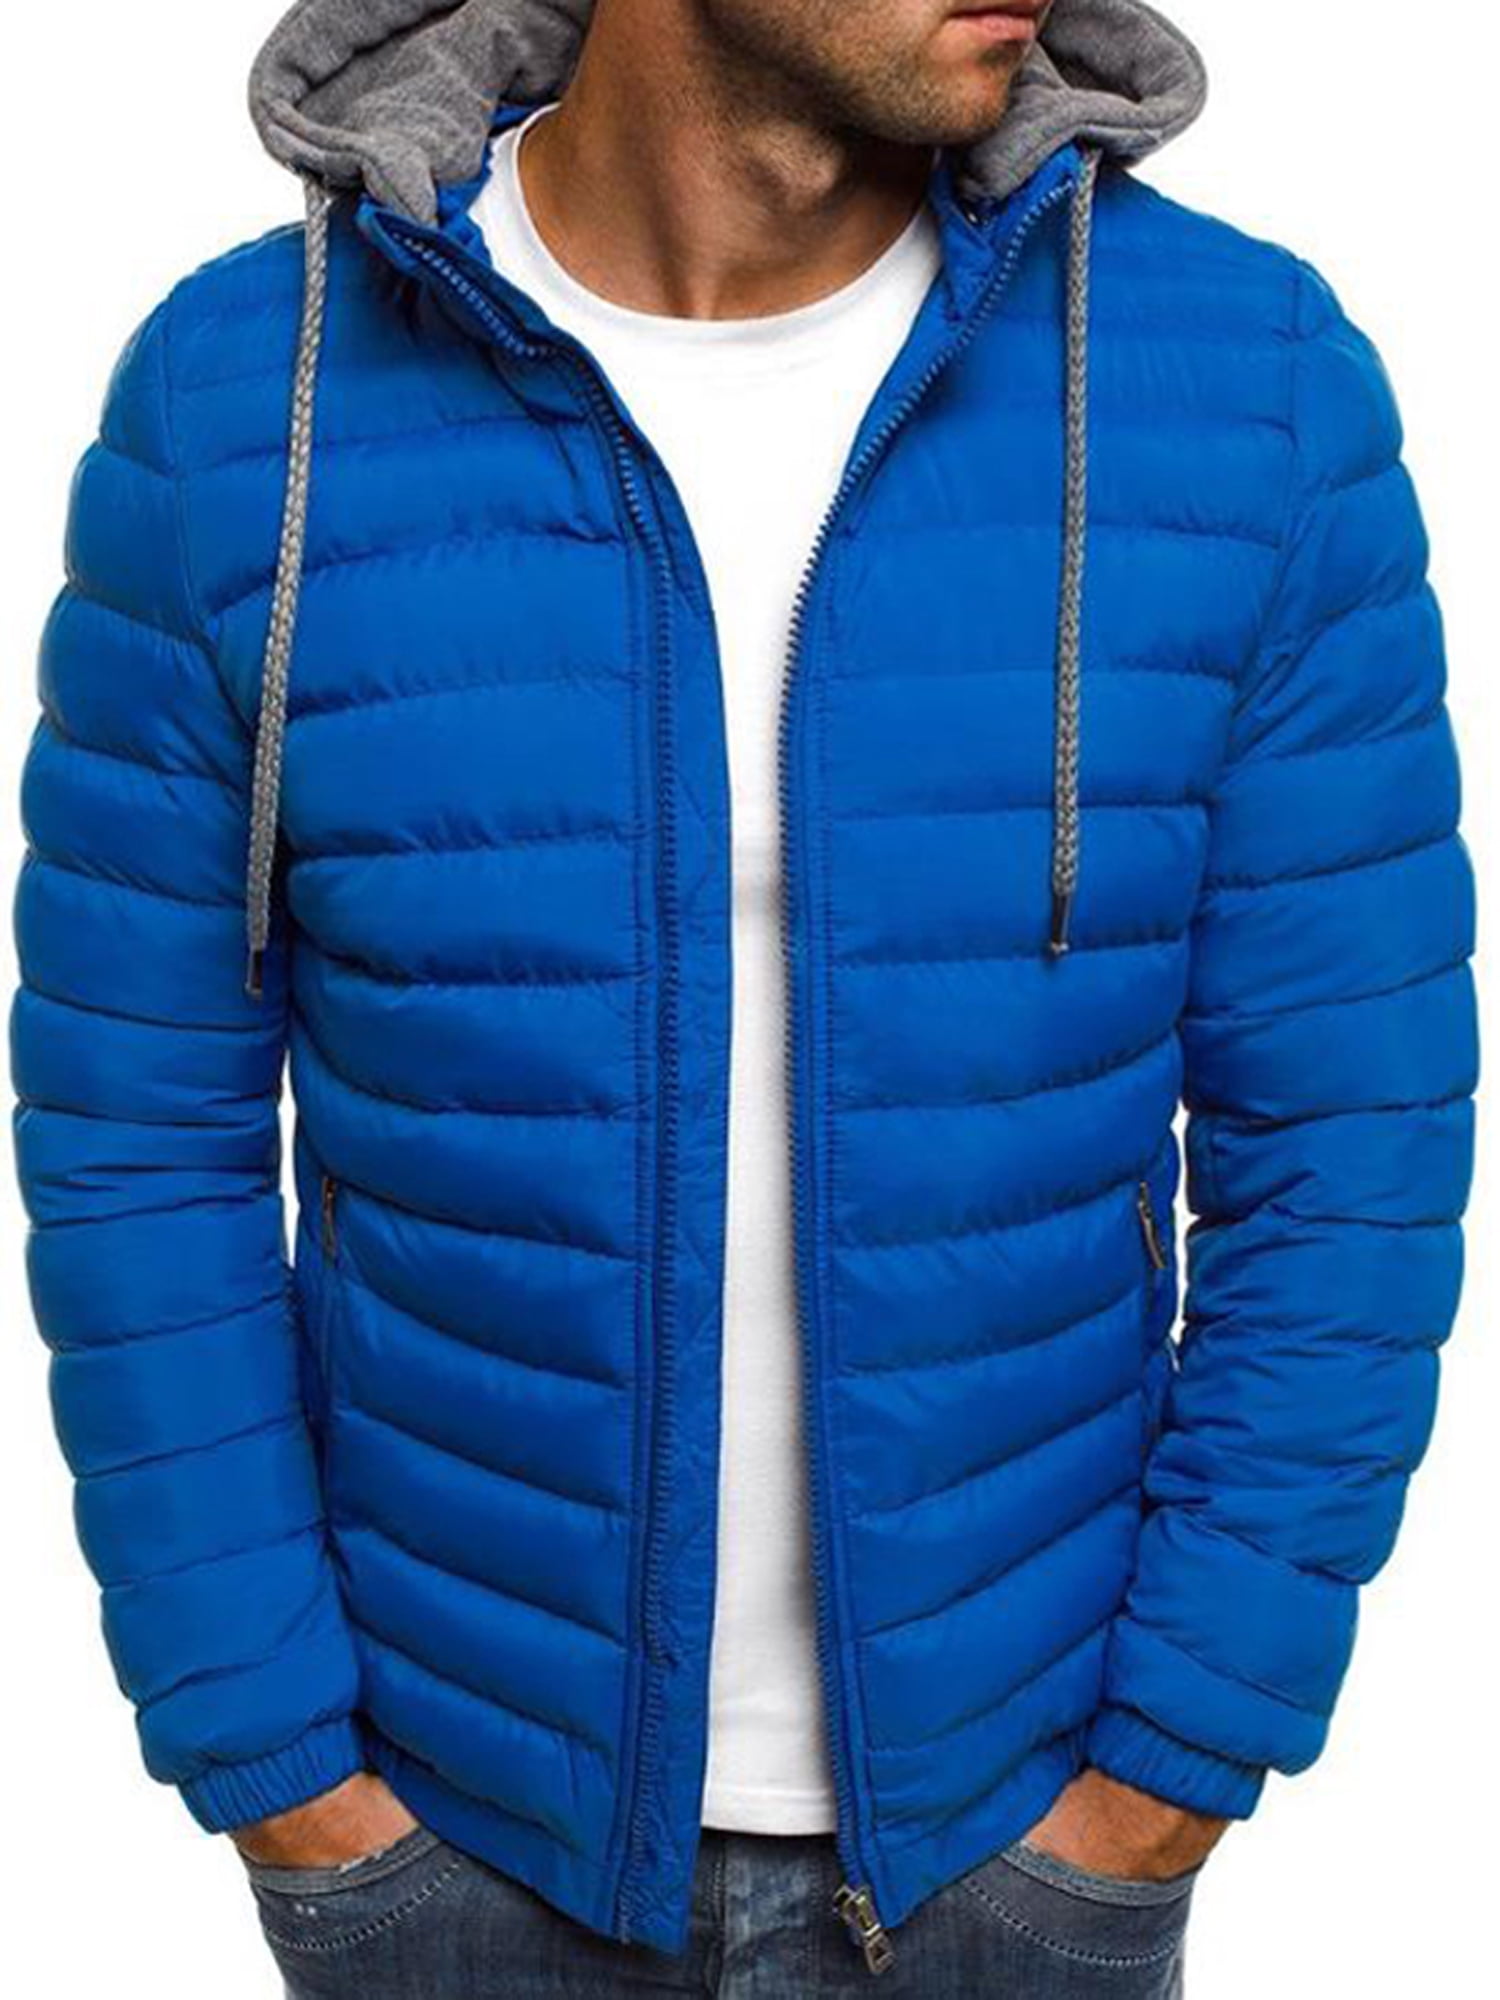 Free Assembly Men's Classic Puffer Jacket with Hood - Walmart.com